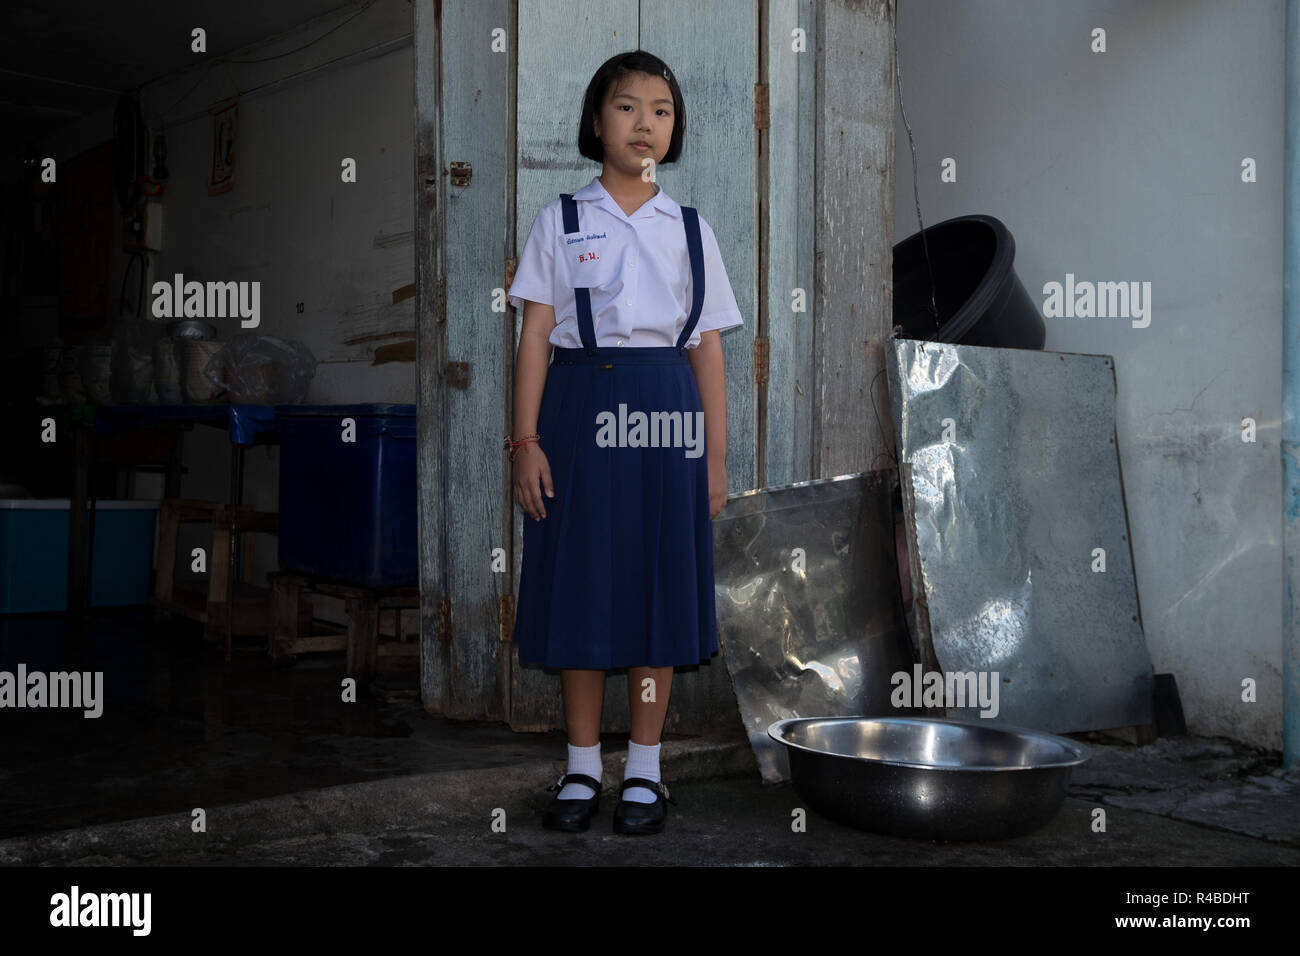 A schoolgirl poses outside a food shop in Hat Yai, Thailand. Stock Photo